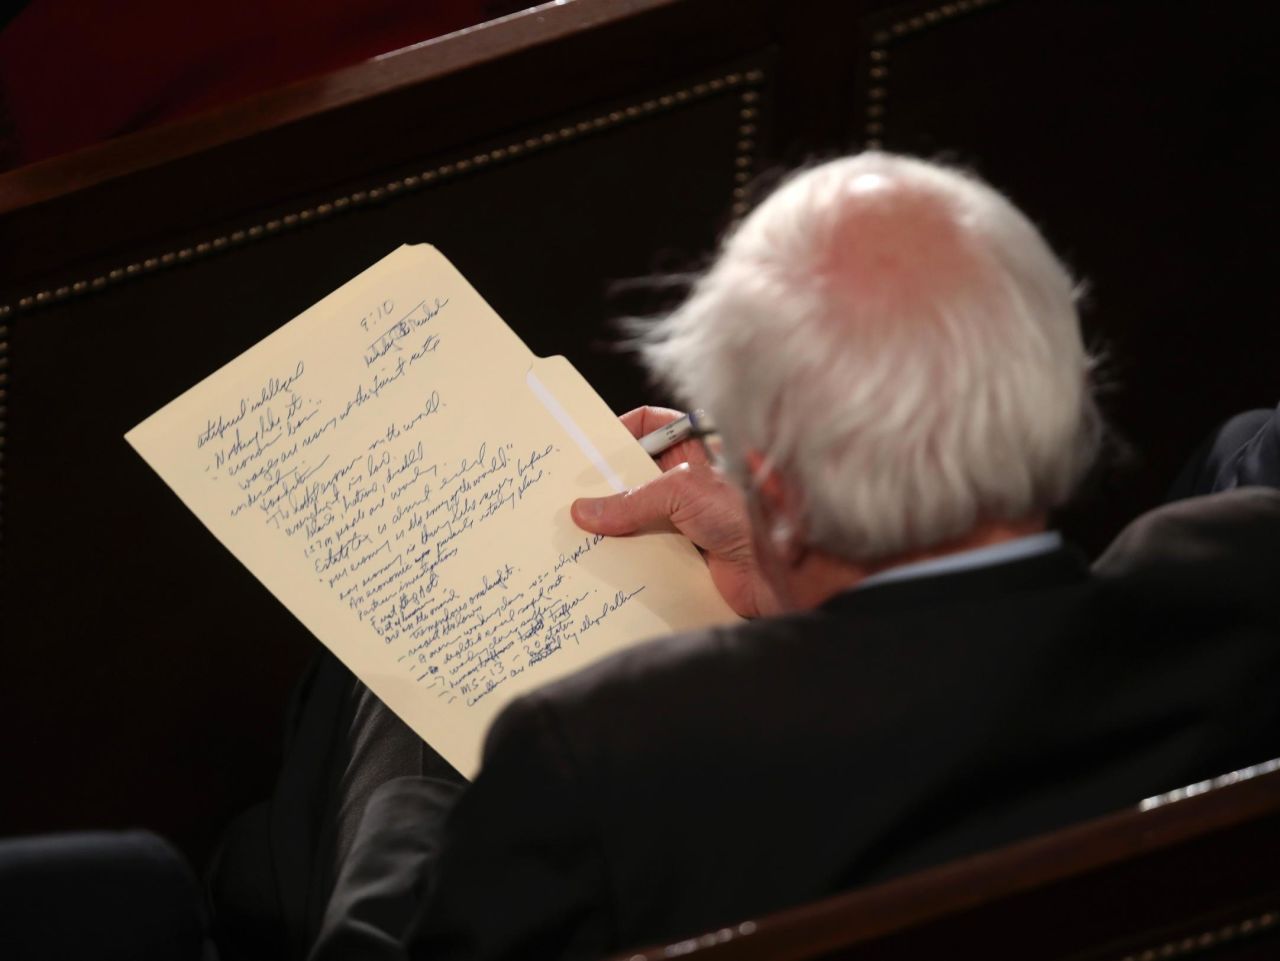 Sanders looks at his notes as he watches President Trump deliver the State of the Union address in February 2019. That month, Sanders announced that he would be running for president again.